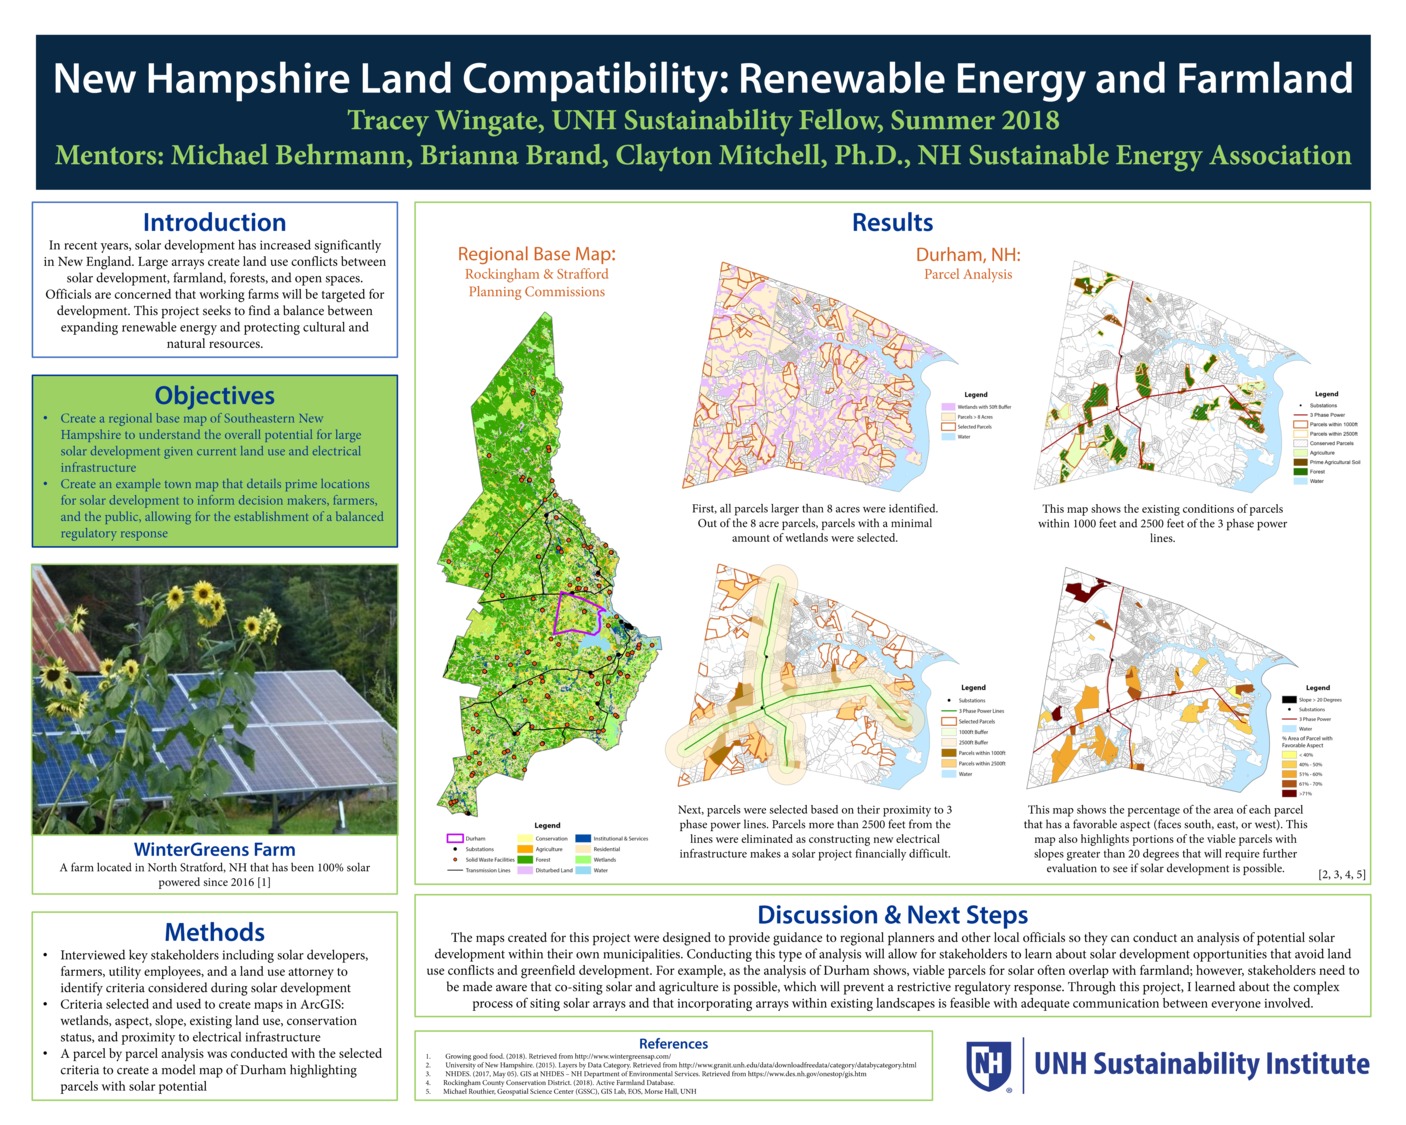 New Hampshire Land Compatibility: Renewable Energy And Farm Land by twingate